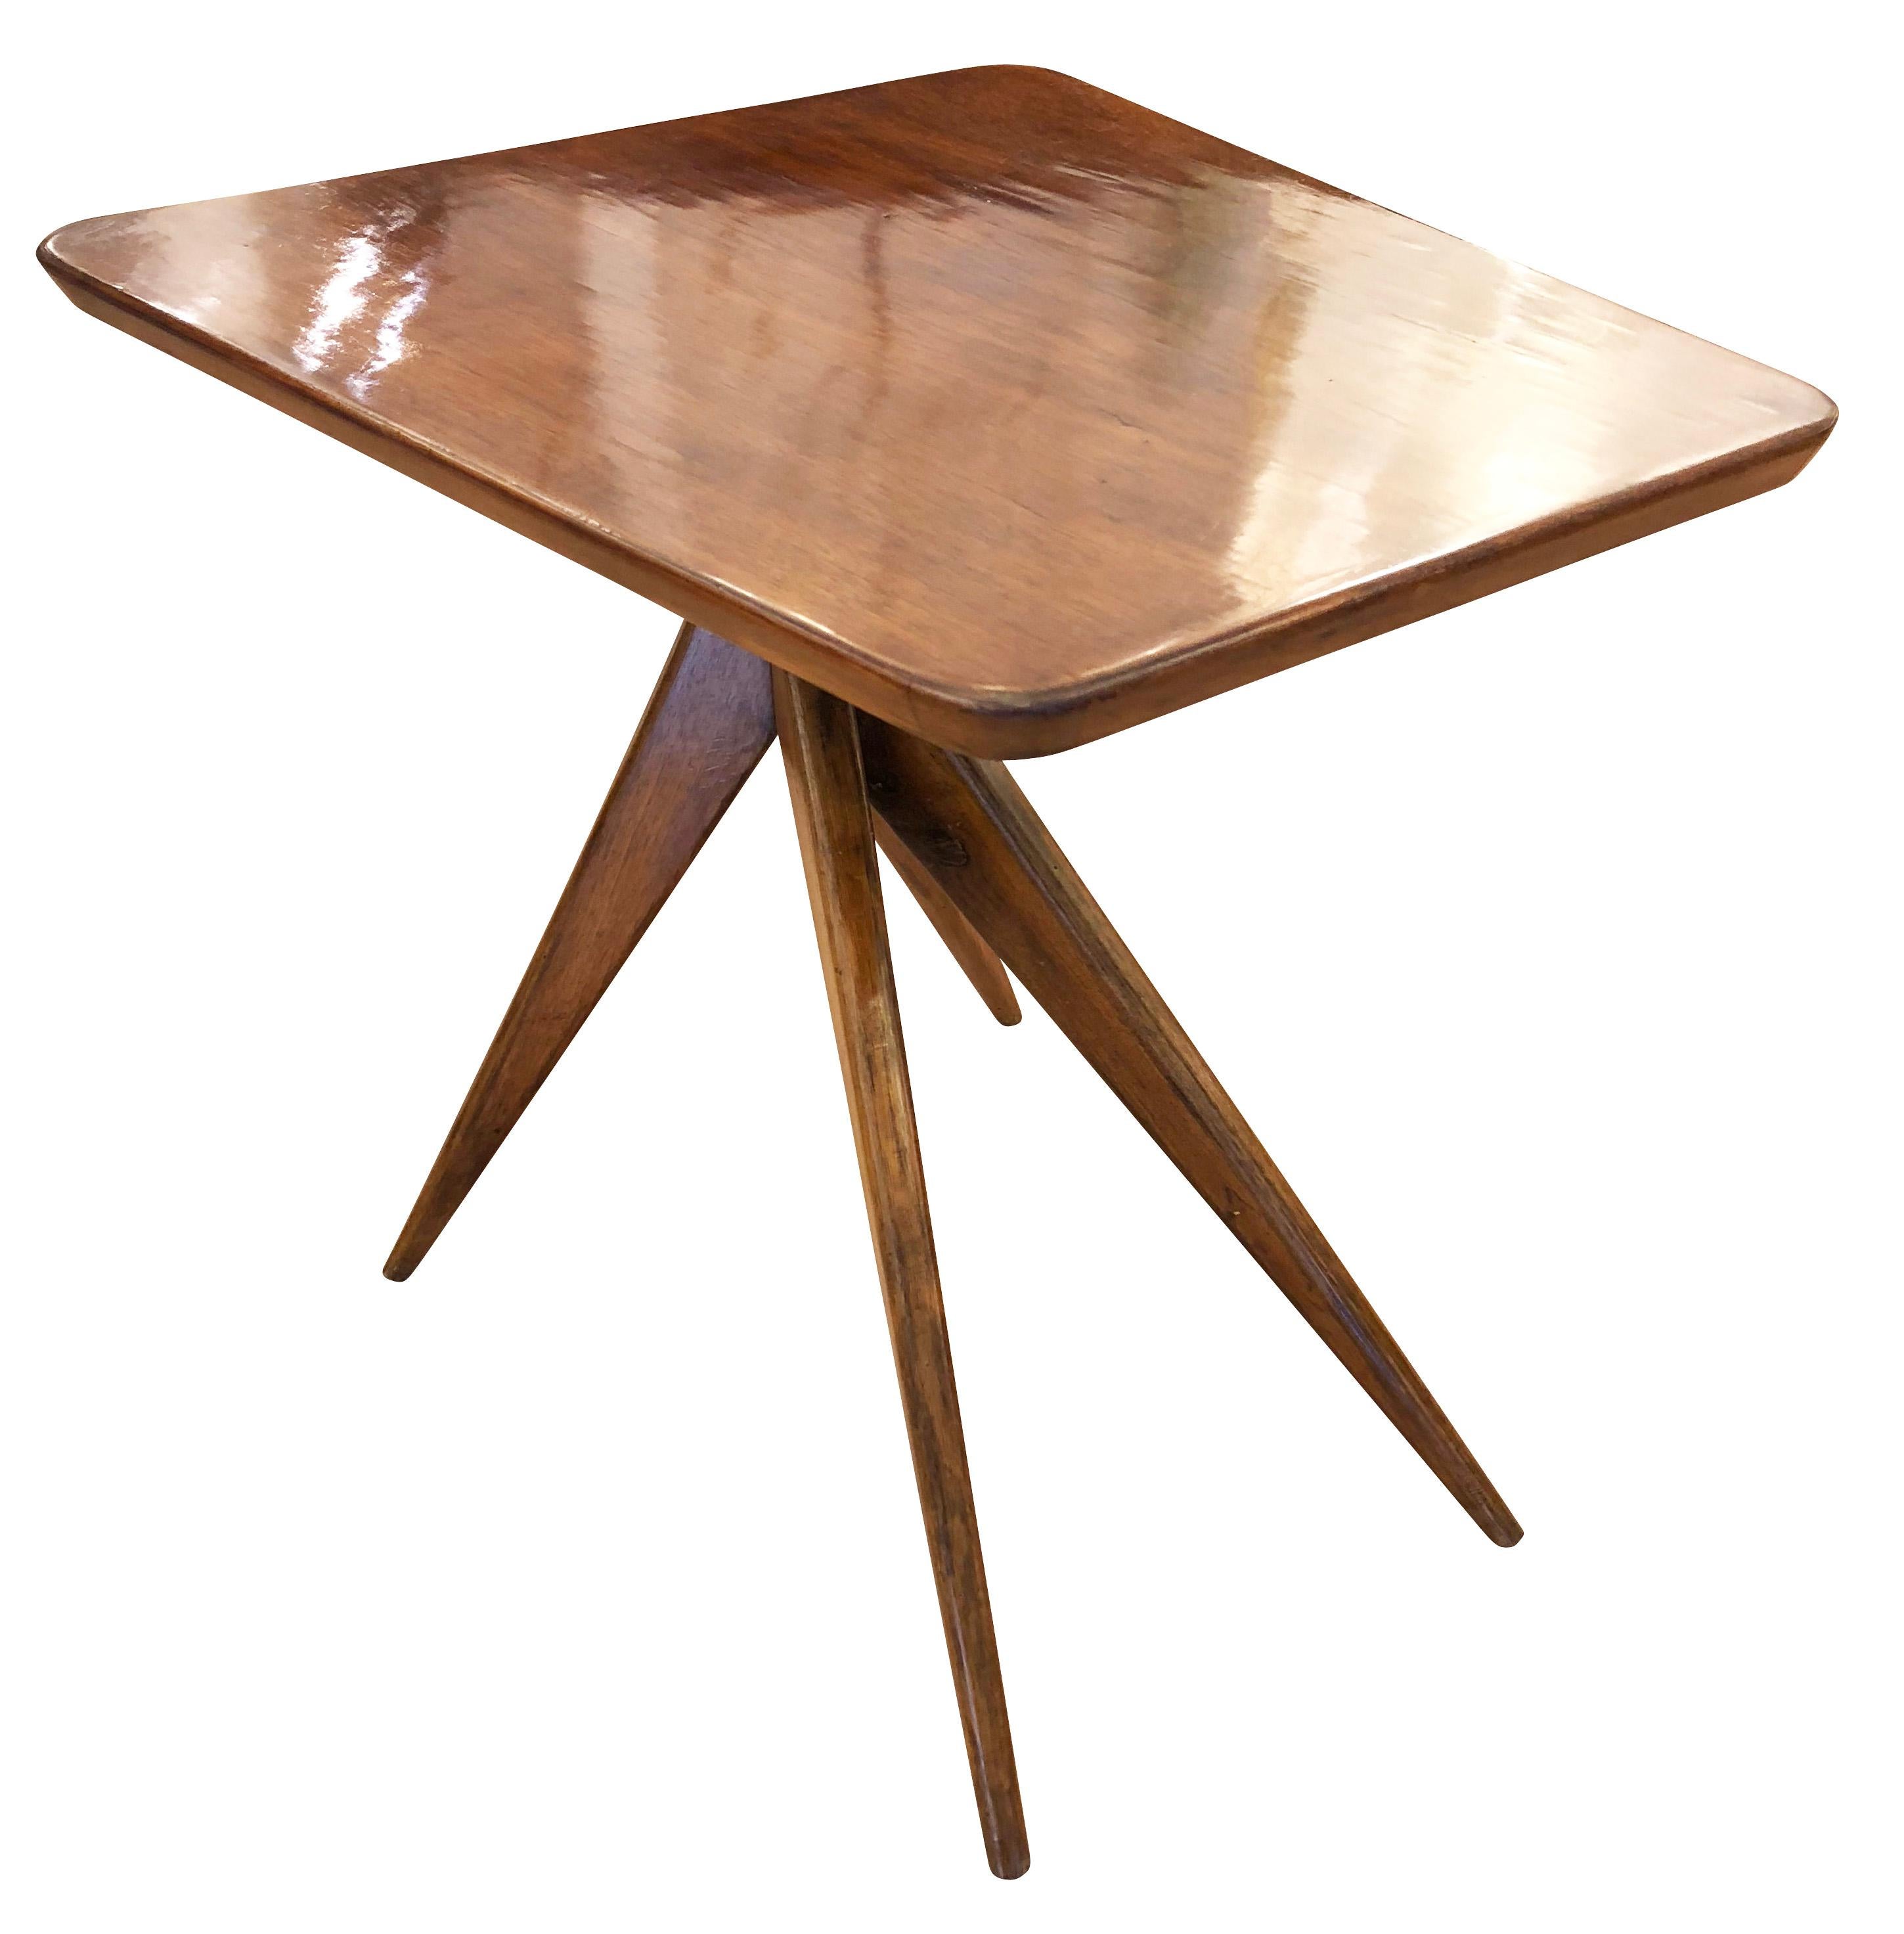 Italian midcentury wood side table with trapezoid top and four tapering legs.

Condition: Excellent vintage condition, minor wear consistent with age and use

Measures: Width 20”

Depth 22”

Height 21.5”.

 